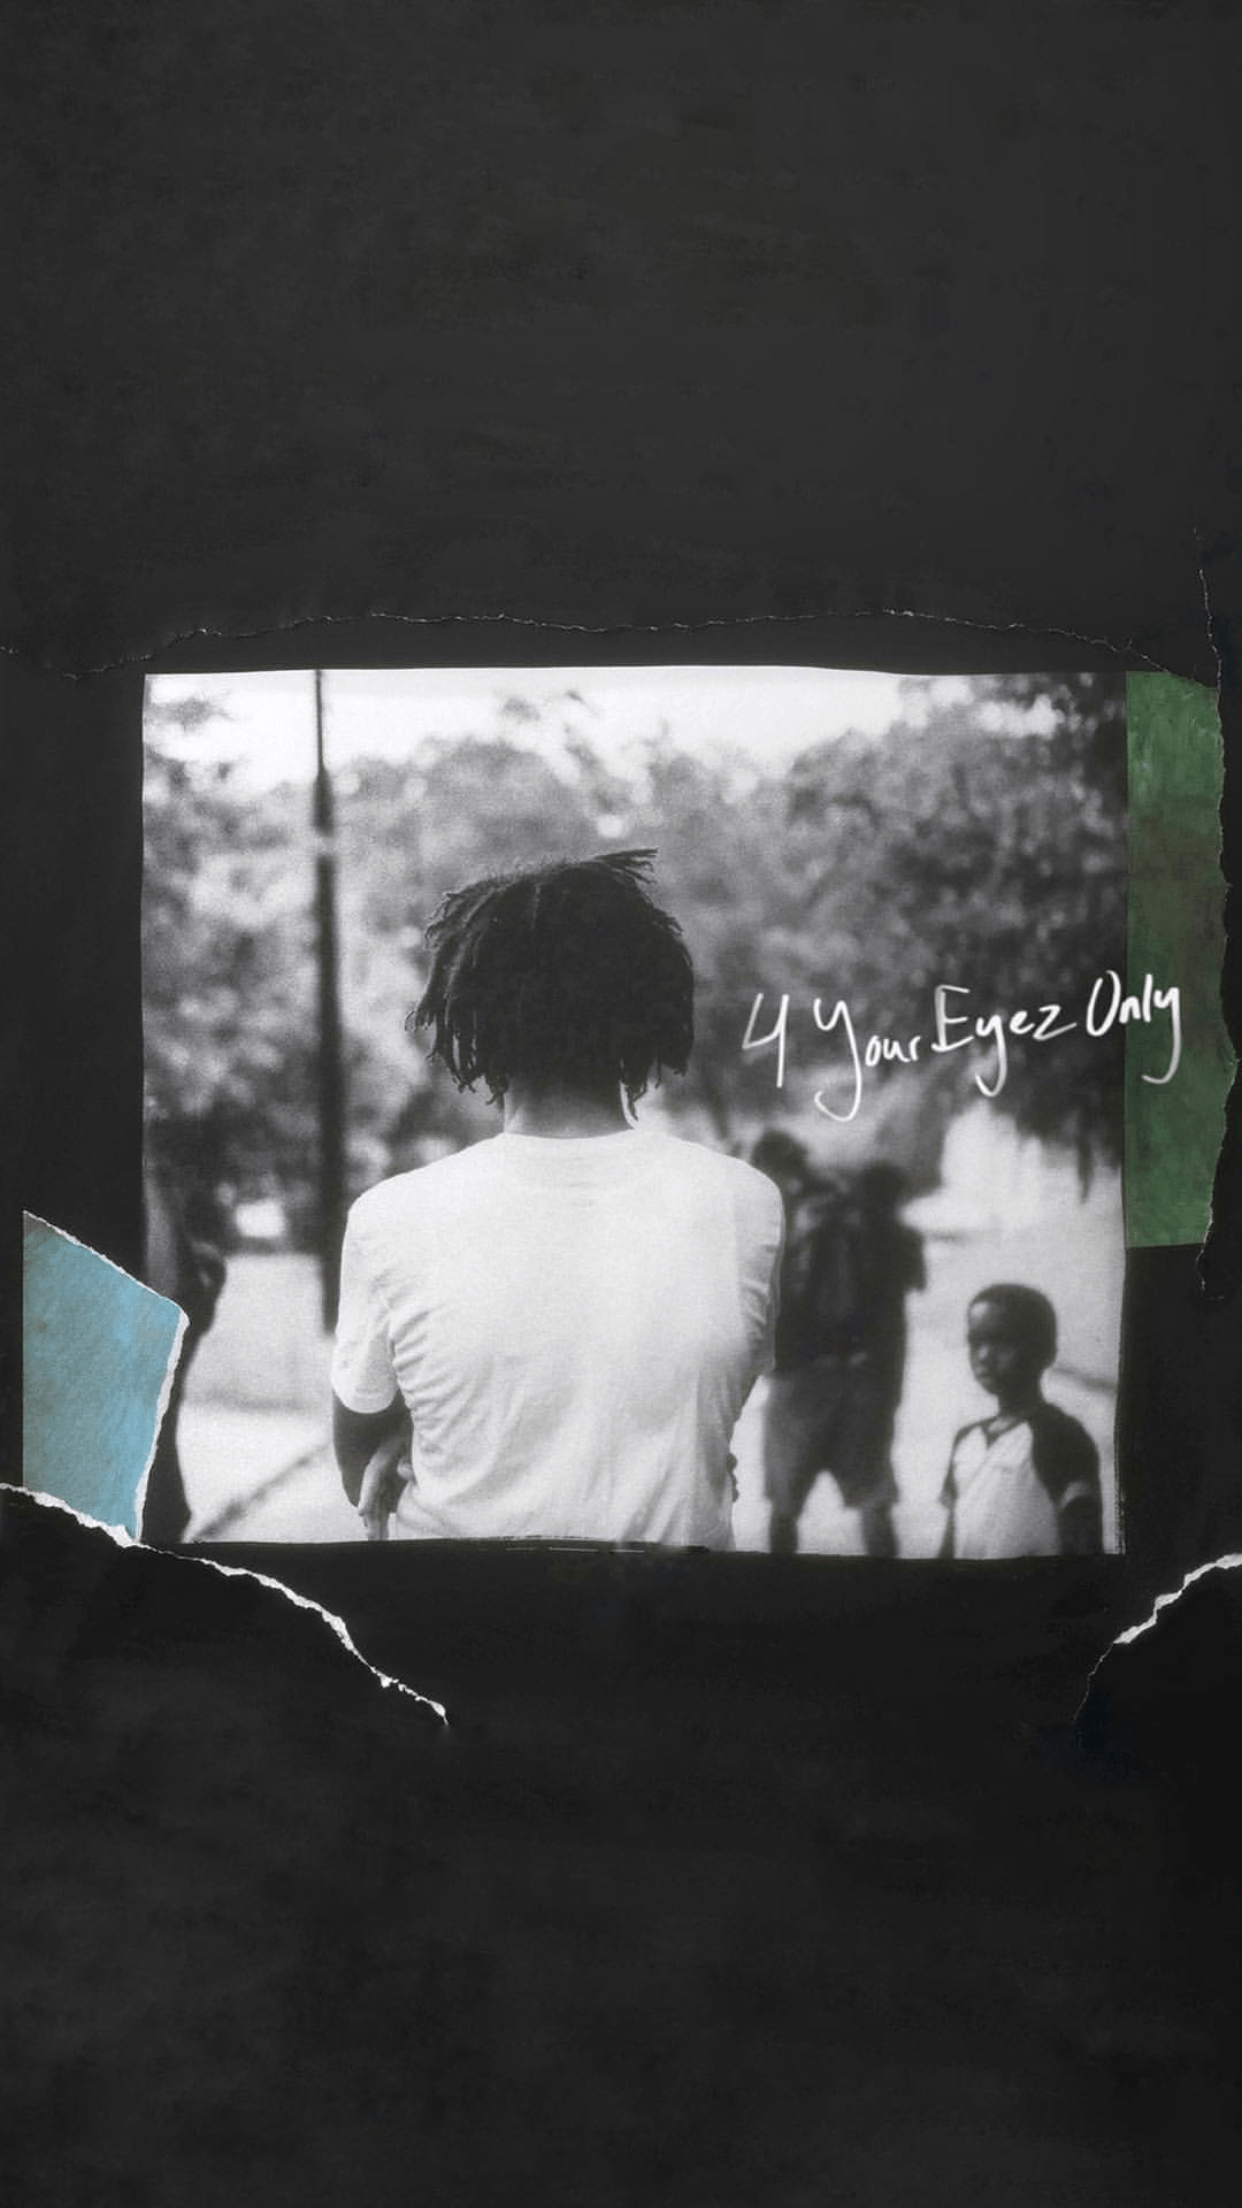 Is the album 4 Your Eyez Only by JCole based on JColes personal  experience